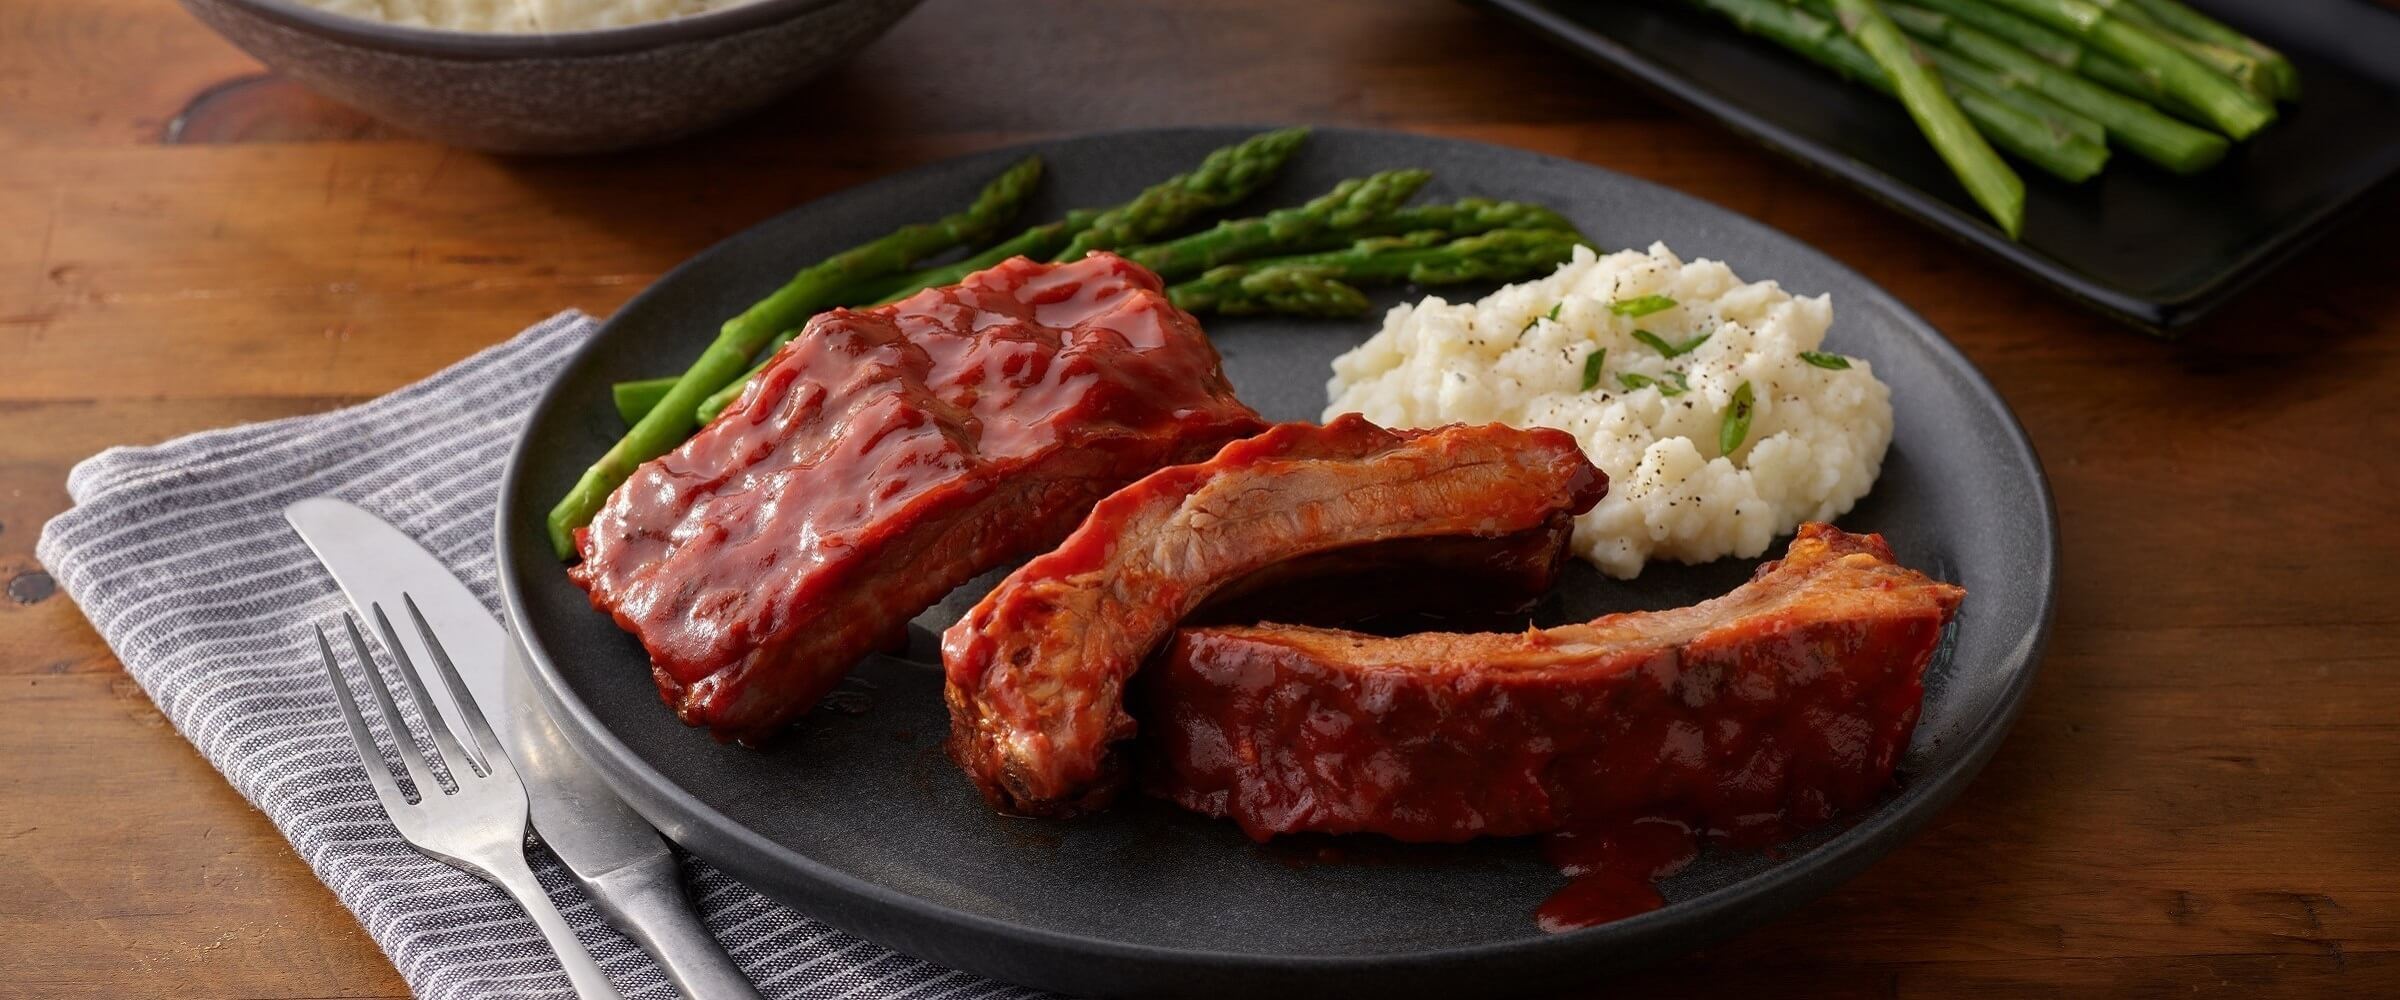 Microwave ribs with potatoes and asparagus on plate plate